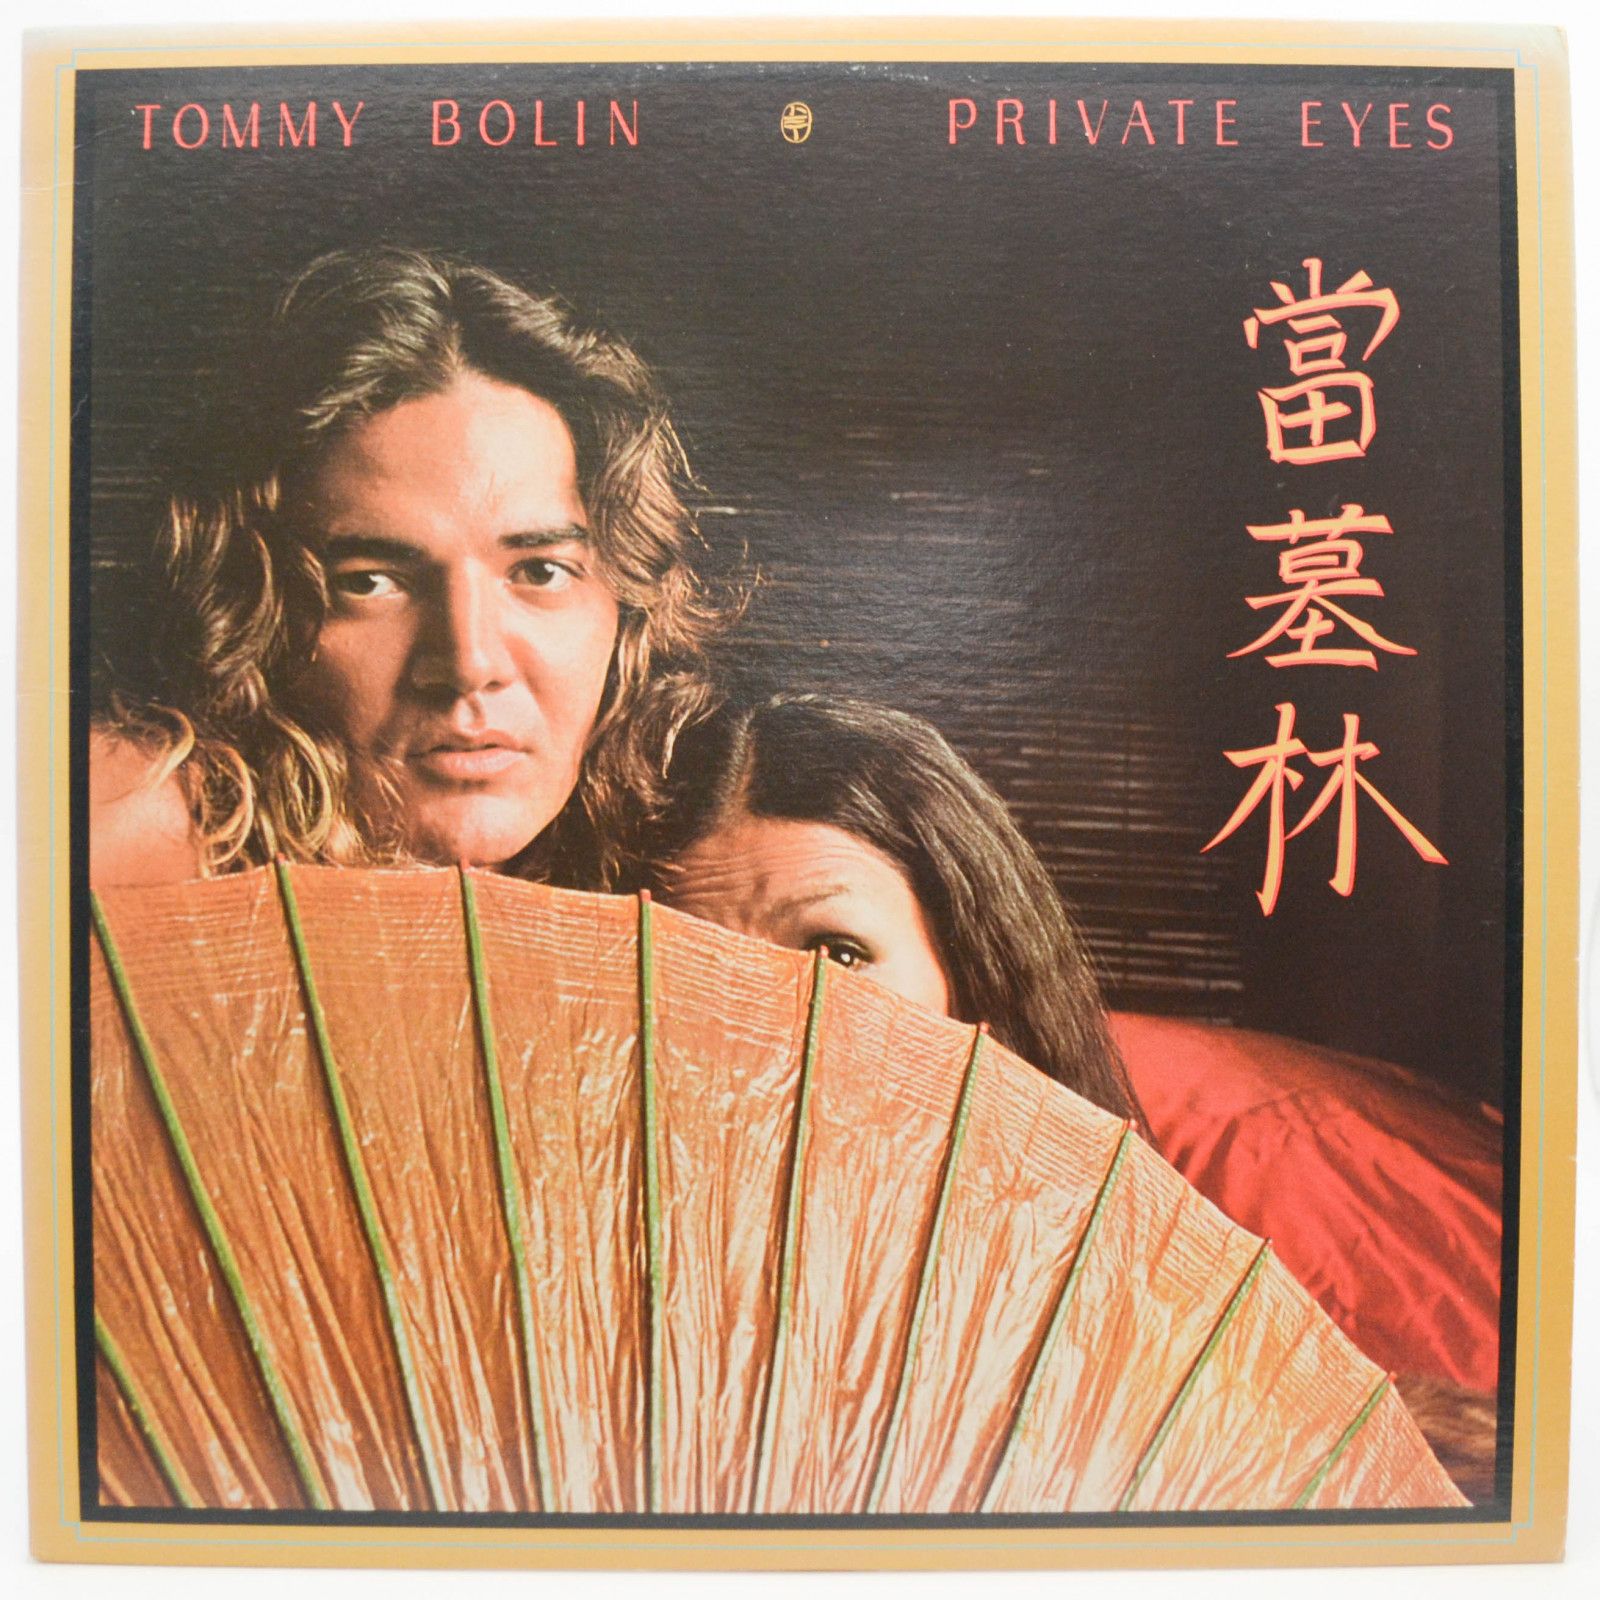 Tommy Bolin — Private Eyes, 1976